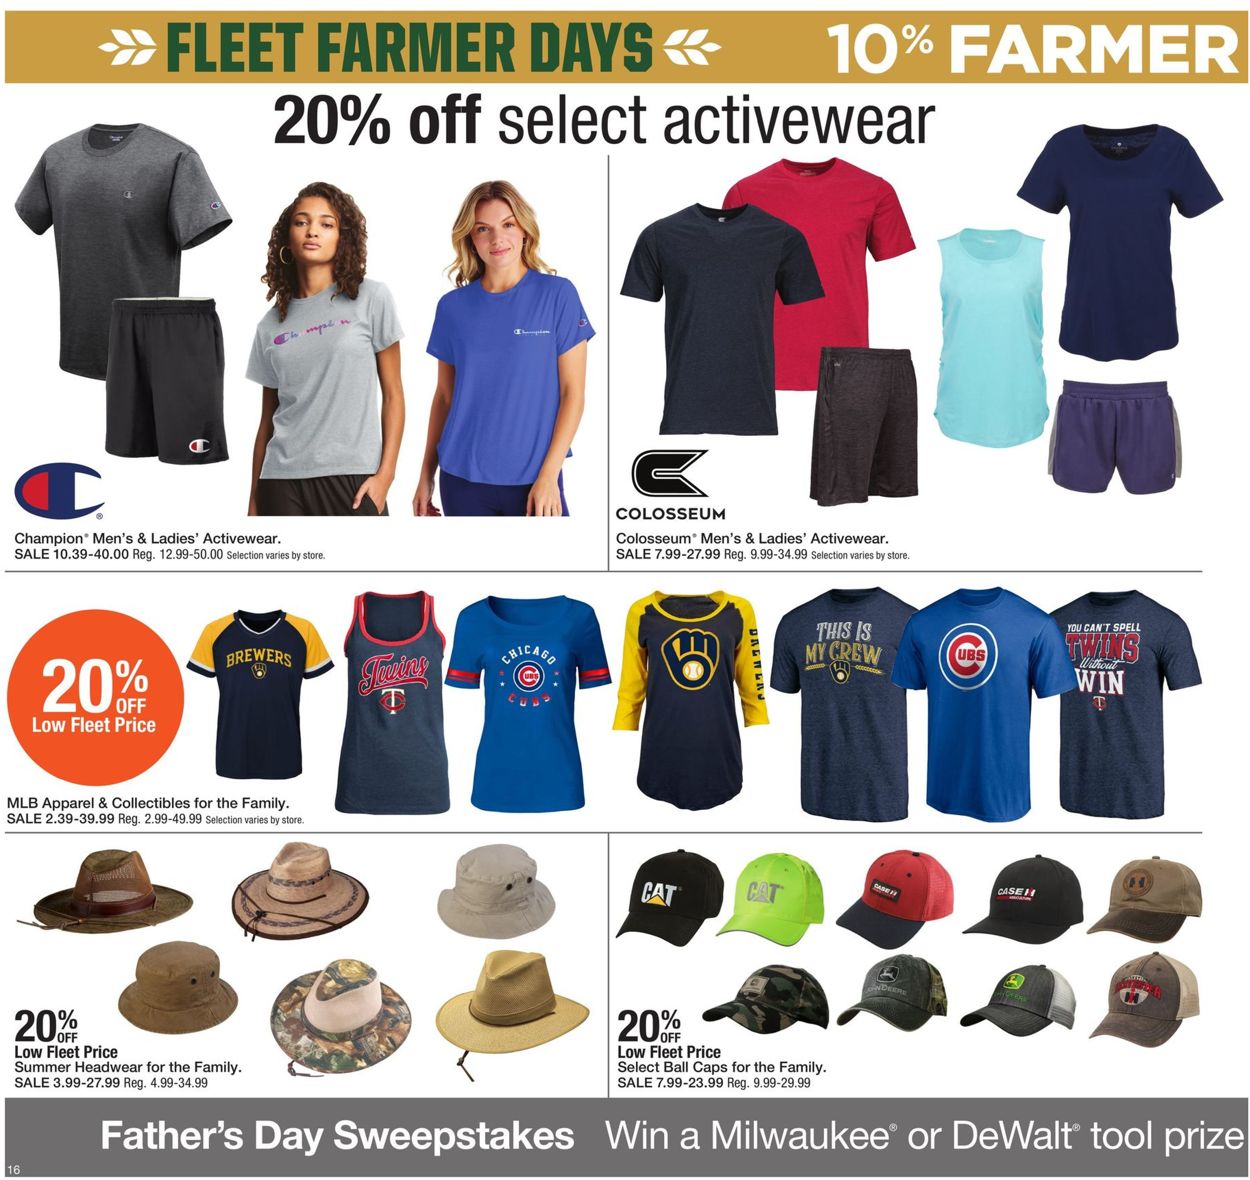 Mills Fleet Farm Current weekly ad 06/04 - 06/12/2021 [16] - frequent ...